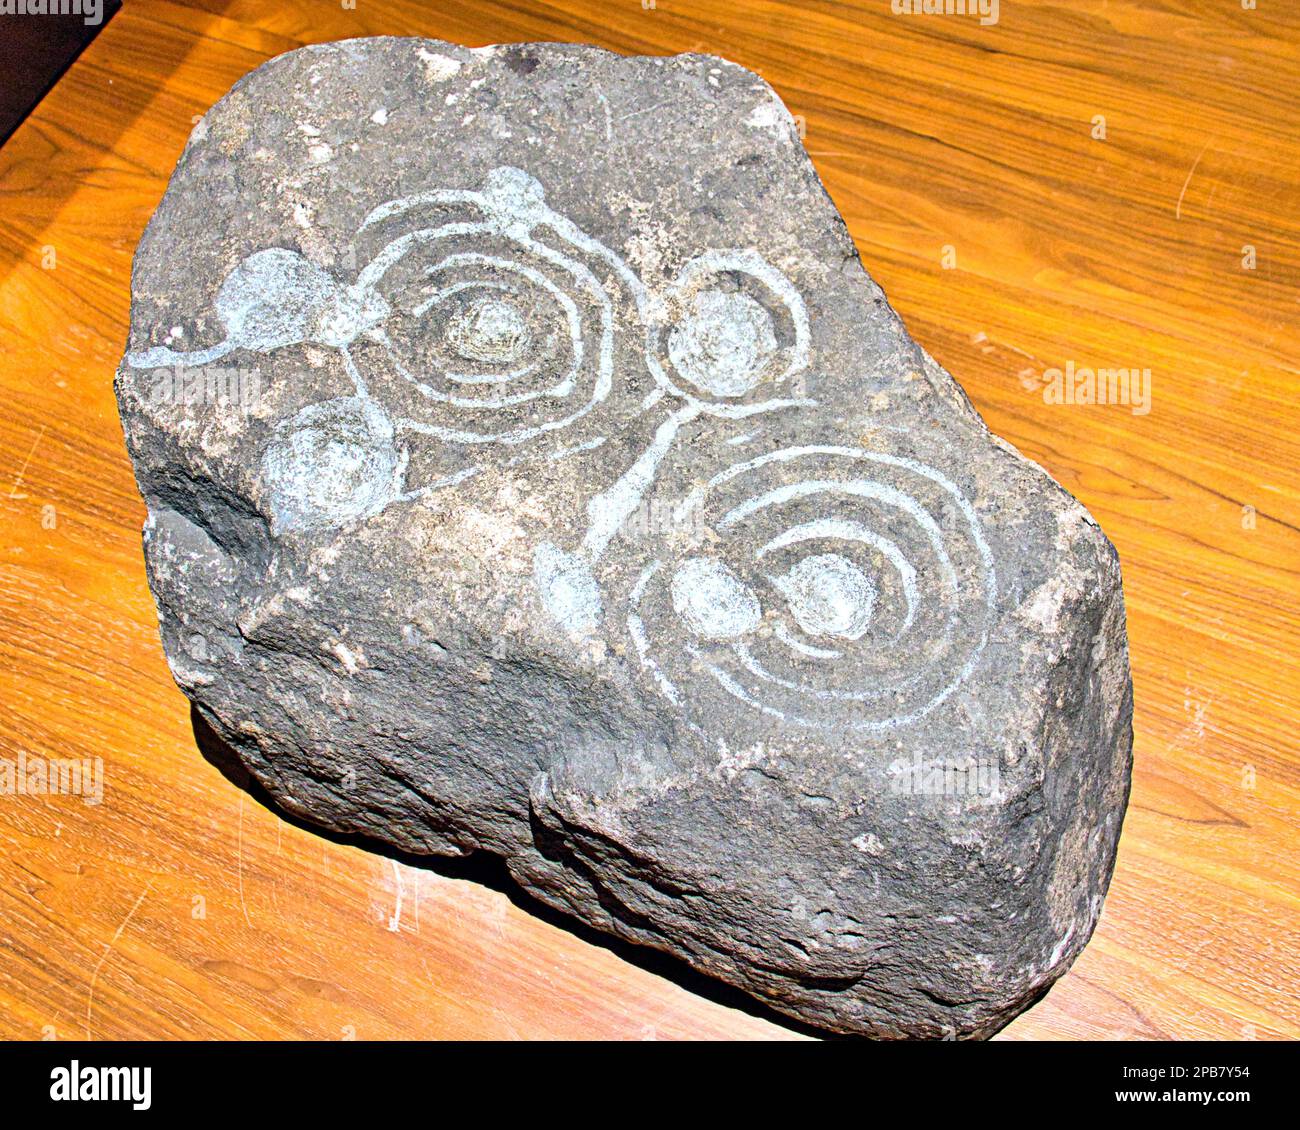 glasgow museum and art galleries cup and rings stone neolithic history scotland Stock Photo